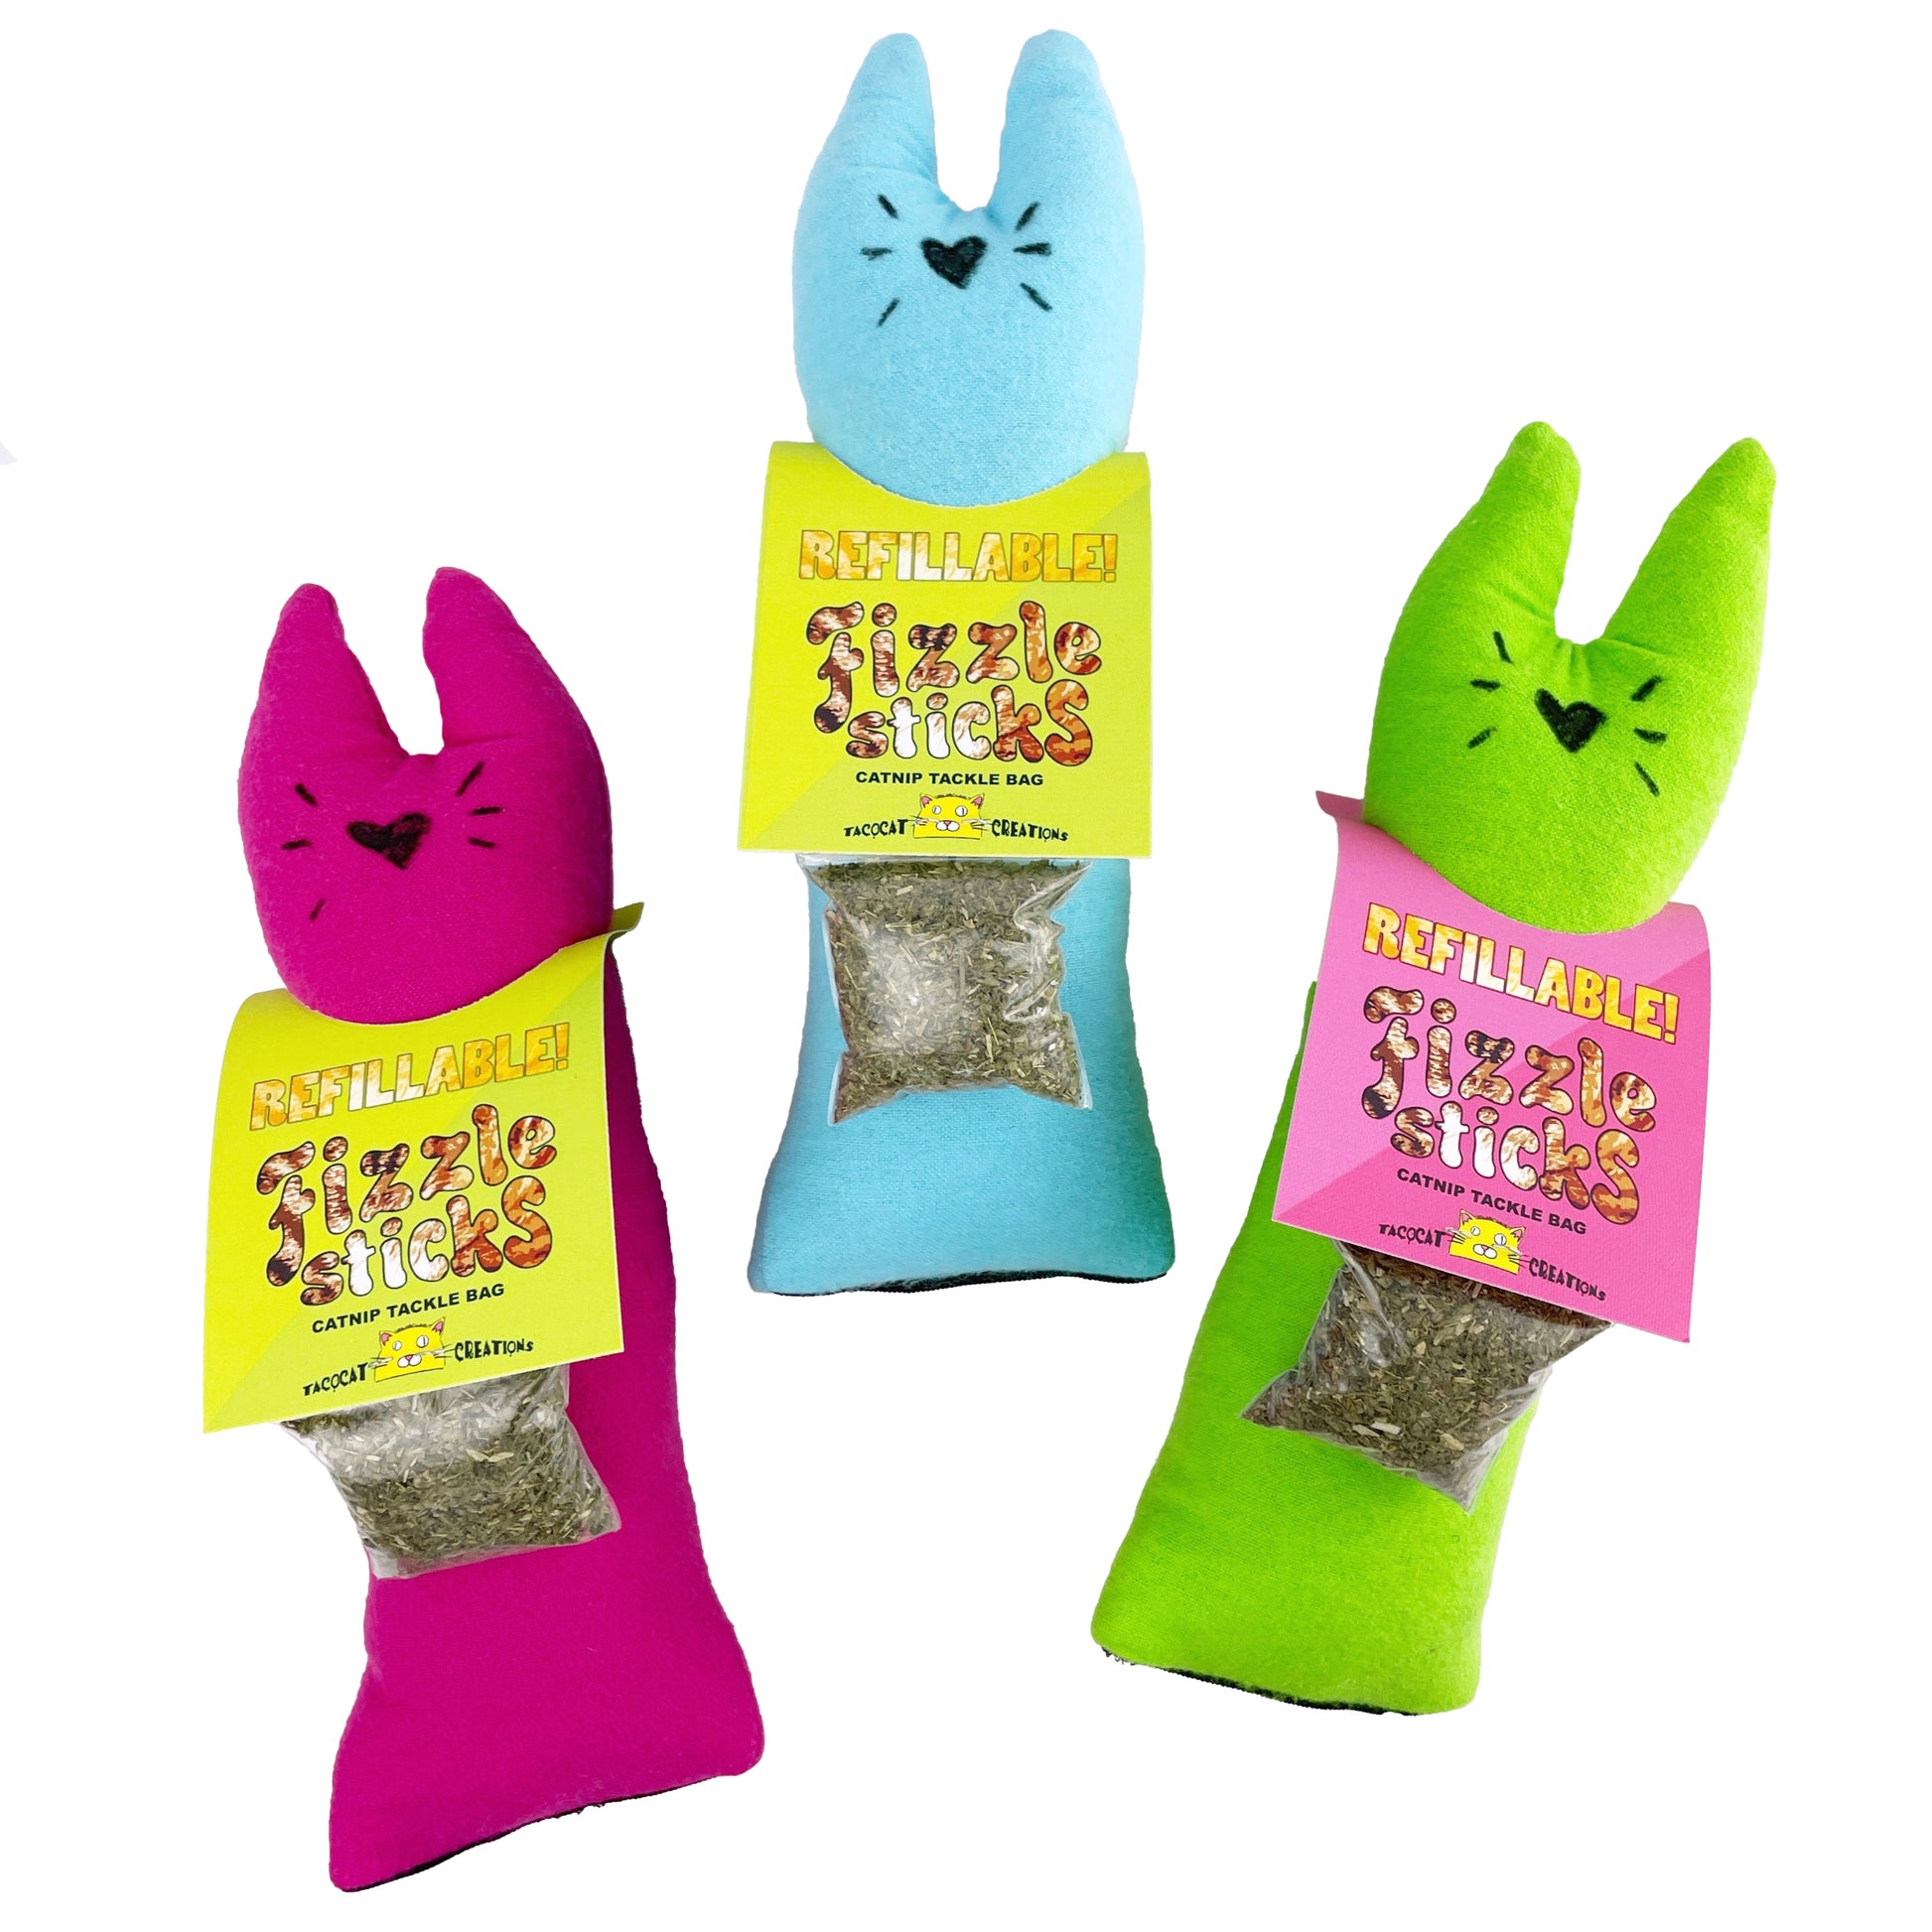 Pink, blue and green variations of Fizzle Sticks cat toys that also have catnip bags attached